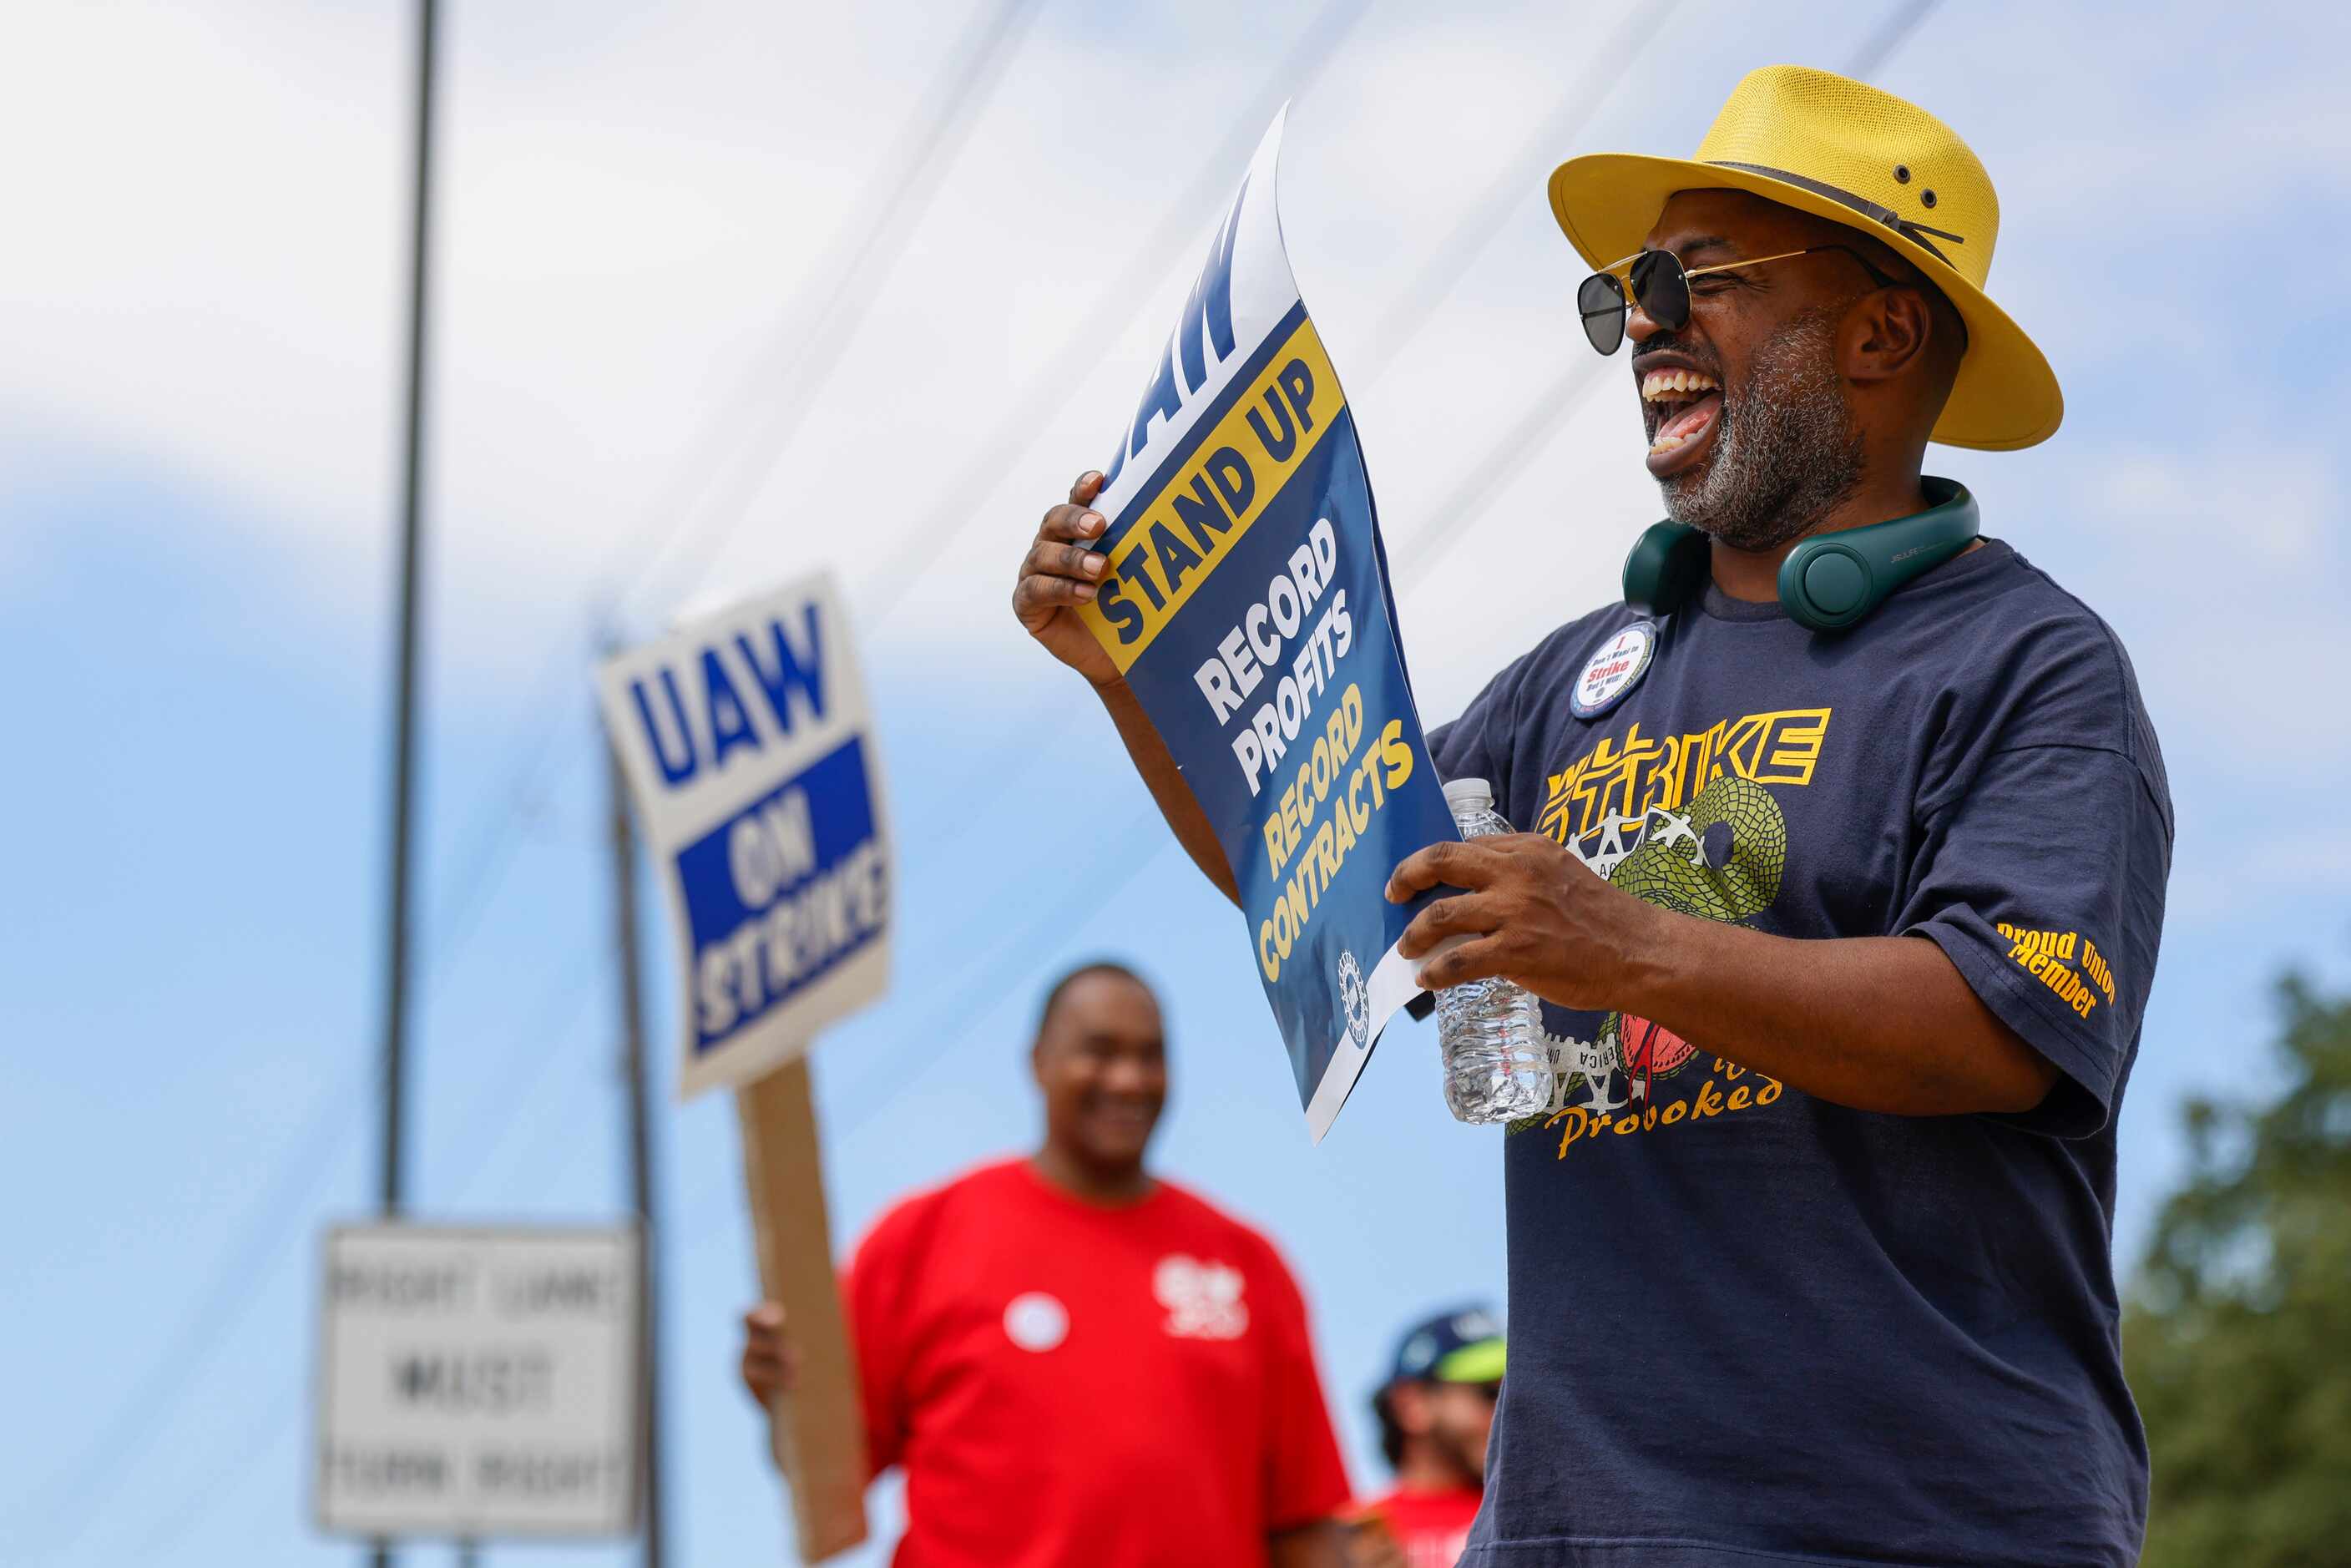 UAW local 2360 president Cleo Wynn take part during a strike outside of the Stellantis...